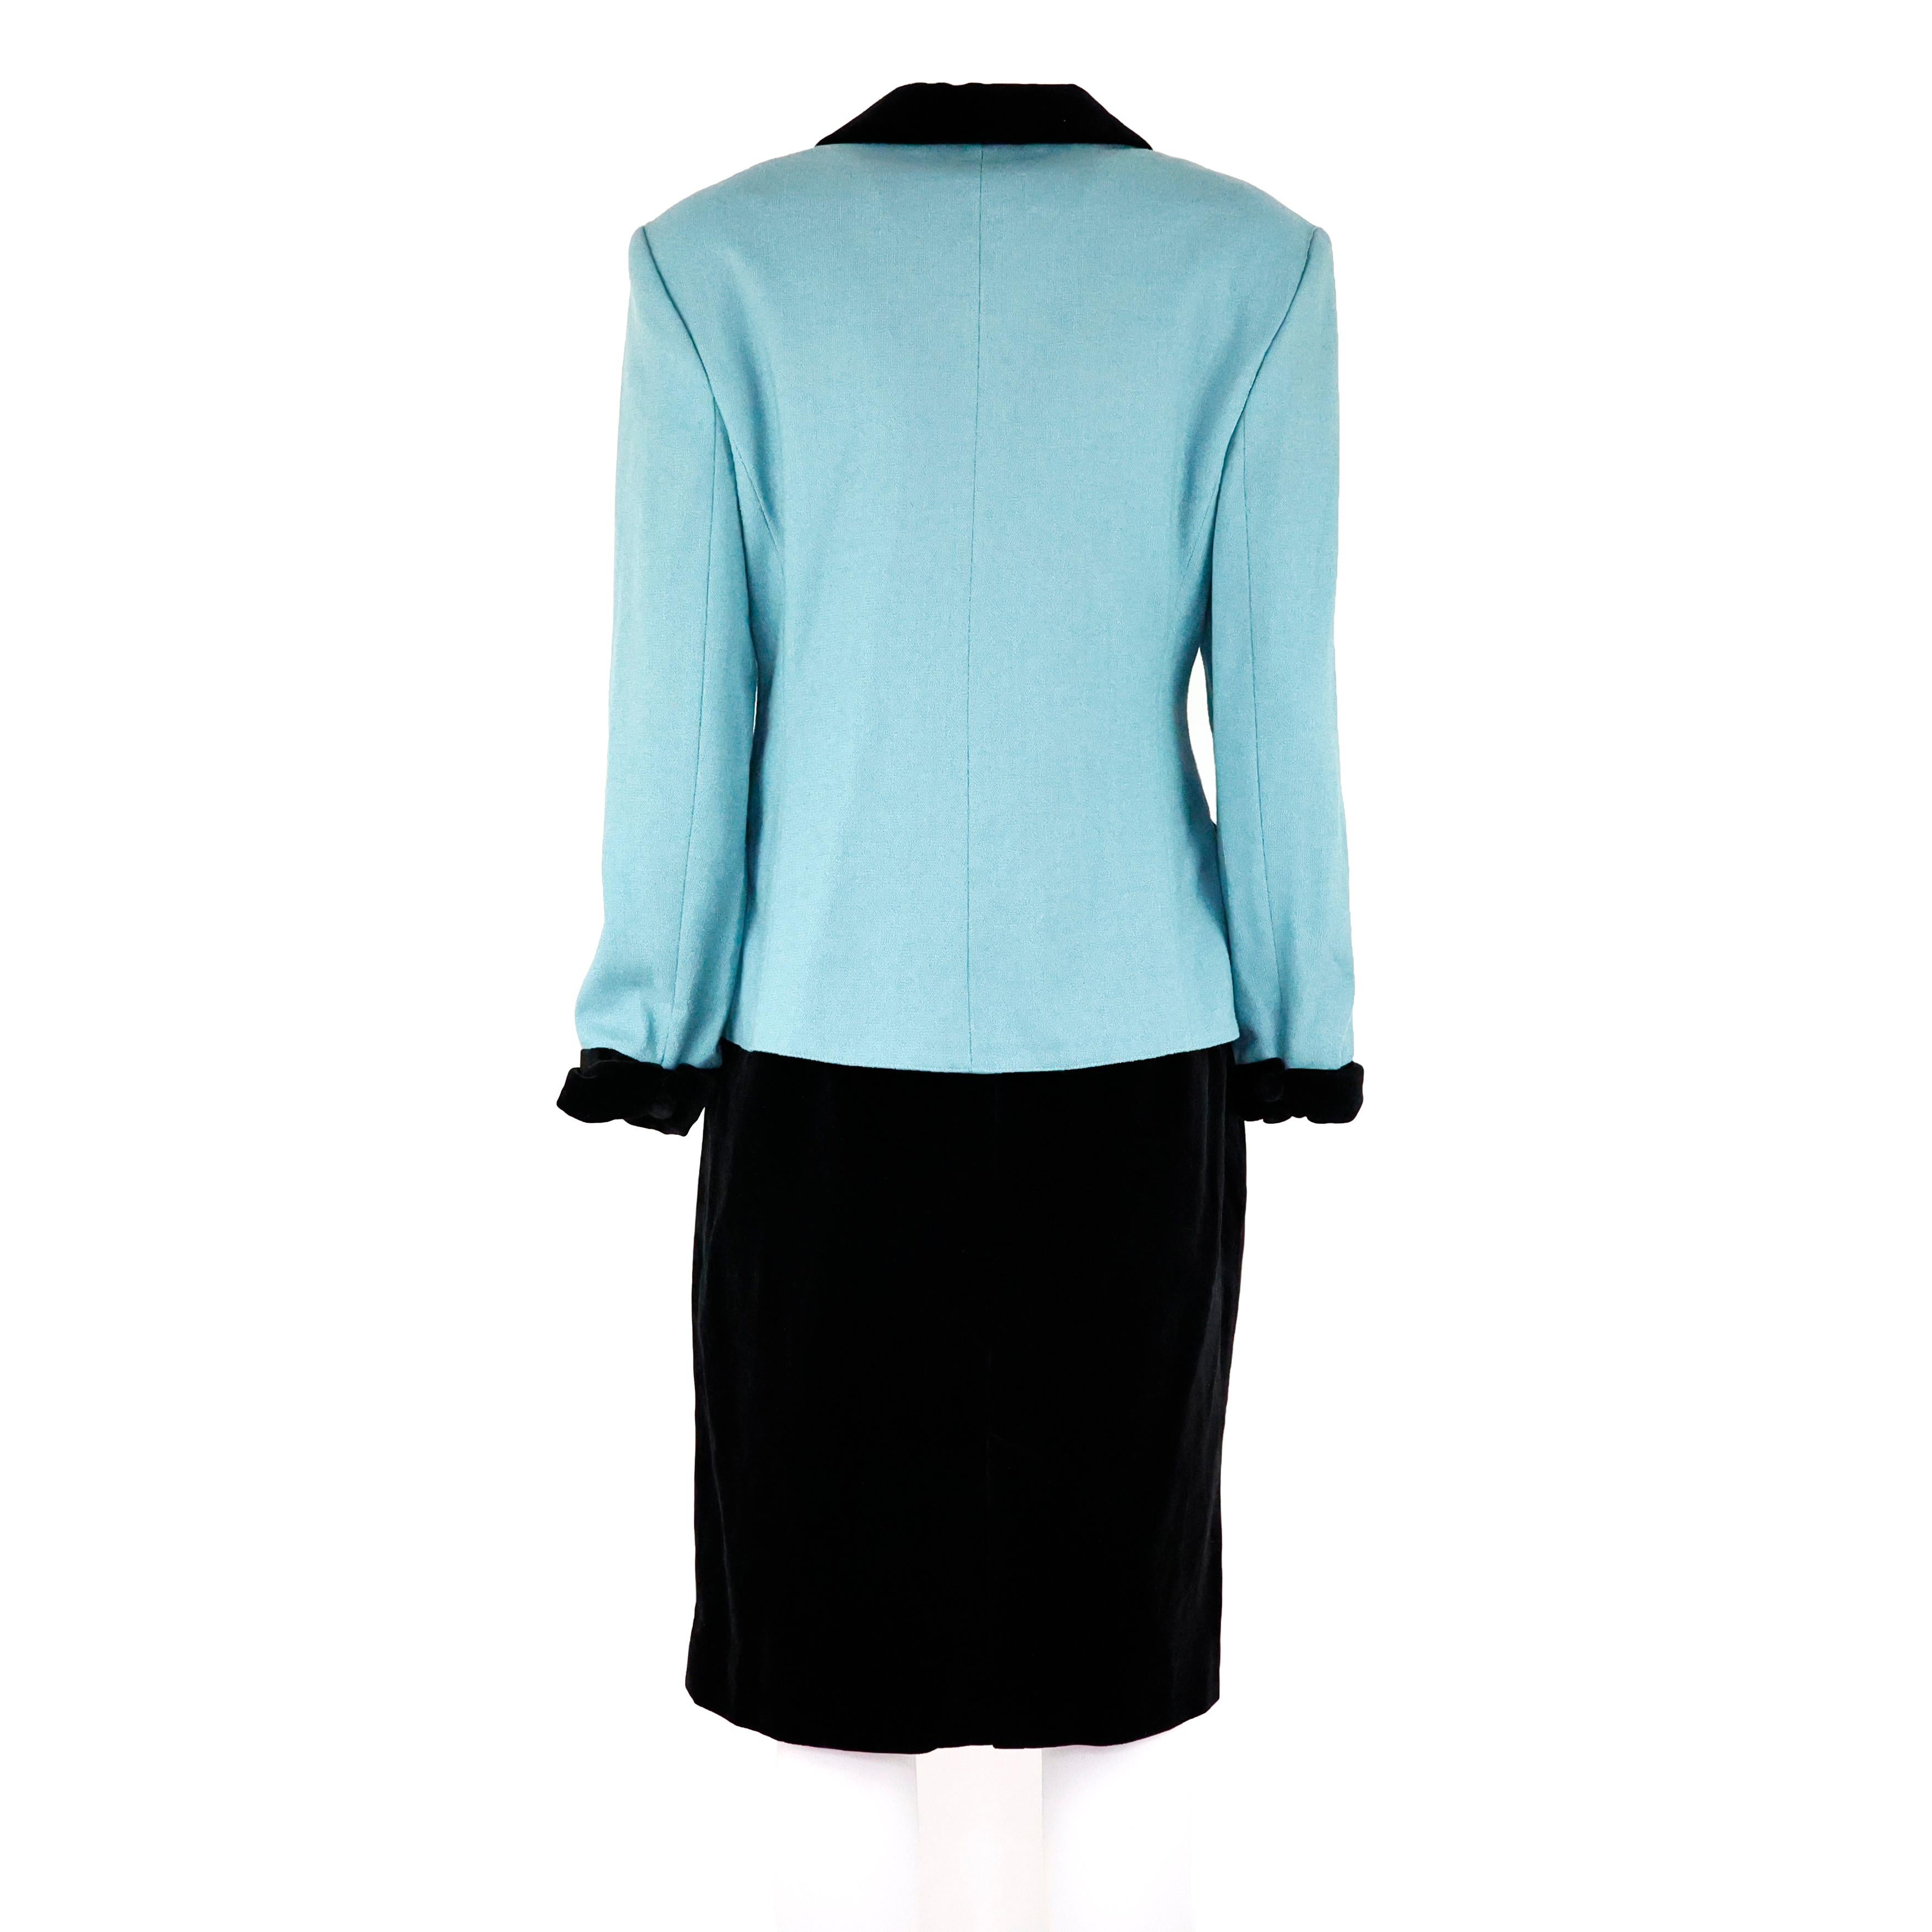 Fendi tailleur set jacket and skirt in wool and velvet color turquoise and black. Size 44 IT

Condition:
Really good.